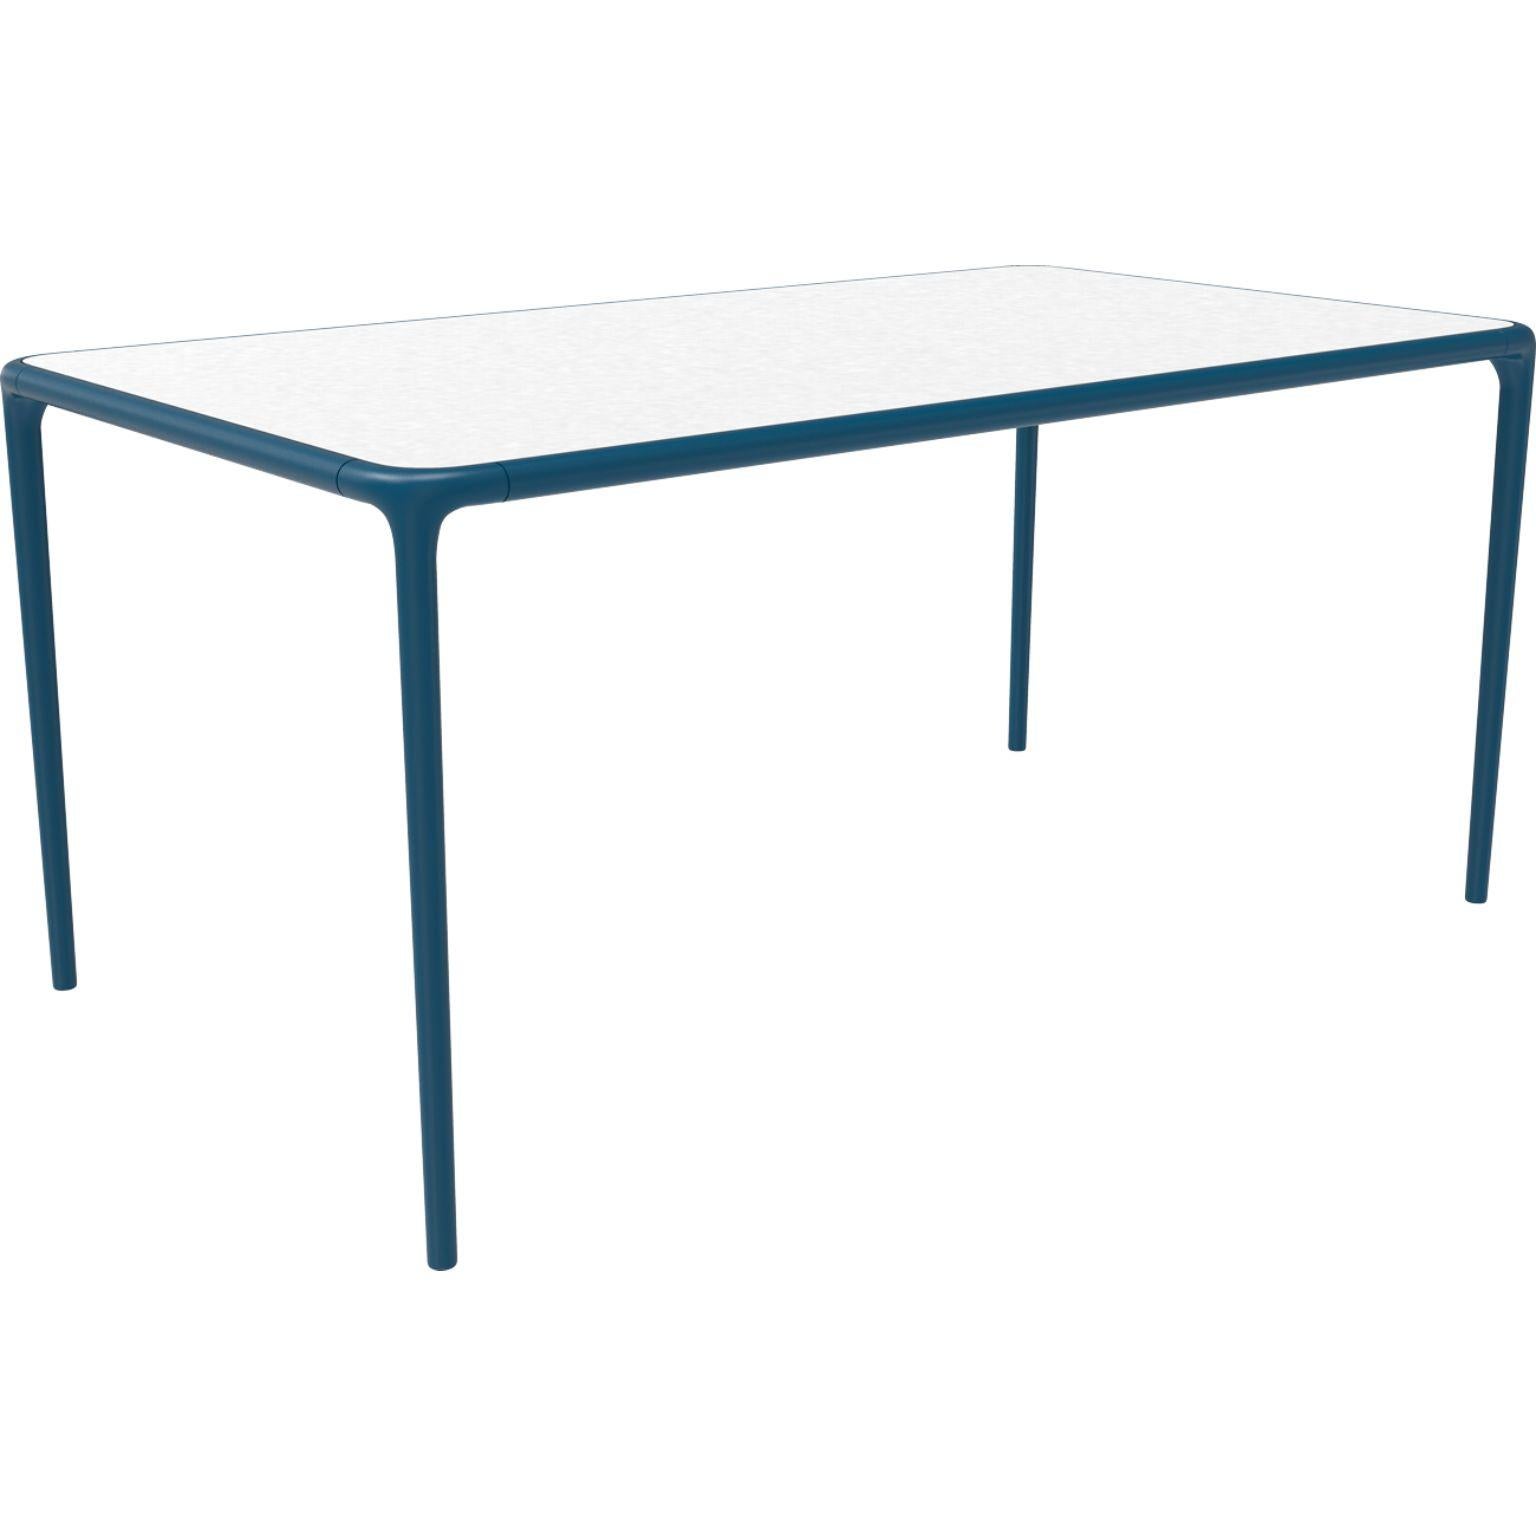 Xaloc navy glass top table 160 by MOWEE
Dimensions: D160 x W90 x H74 cm
Material: Aluminum, tinted tempered glass top.
Also available in different aluminum colors and finishes (HPL Black Edge or Neolith). 

Xaloc synthesizes the lines of